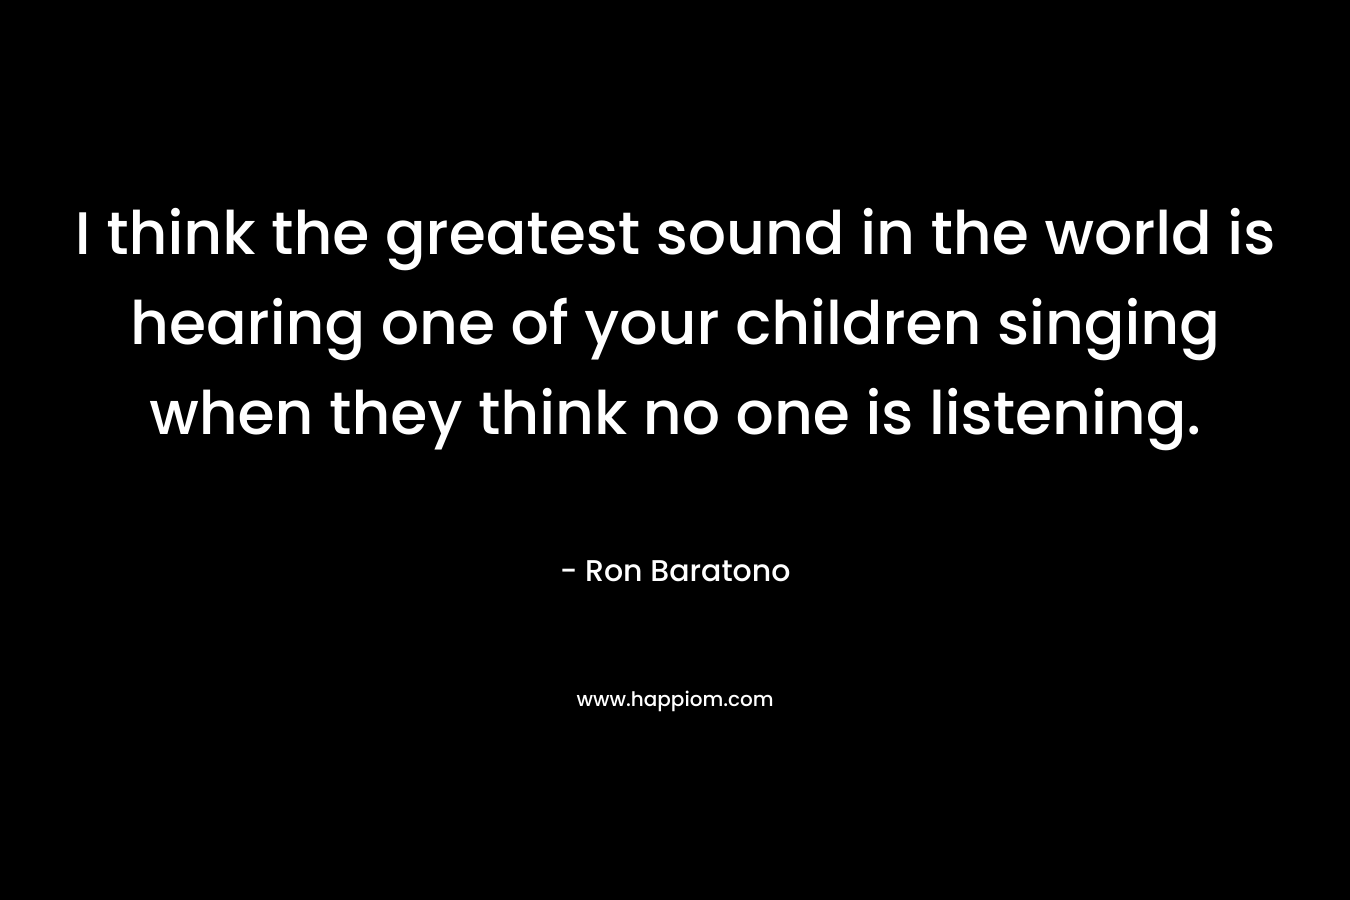 I think the greatest sound in the world is hearing one of your children singing when they think no one is listening.